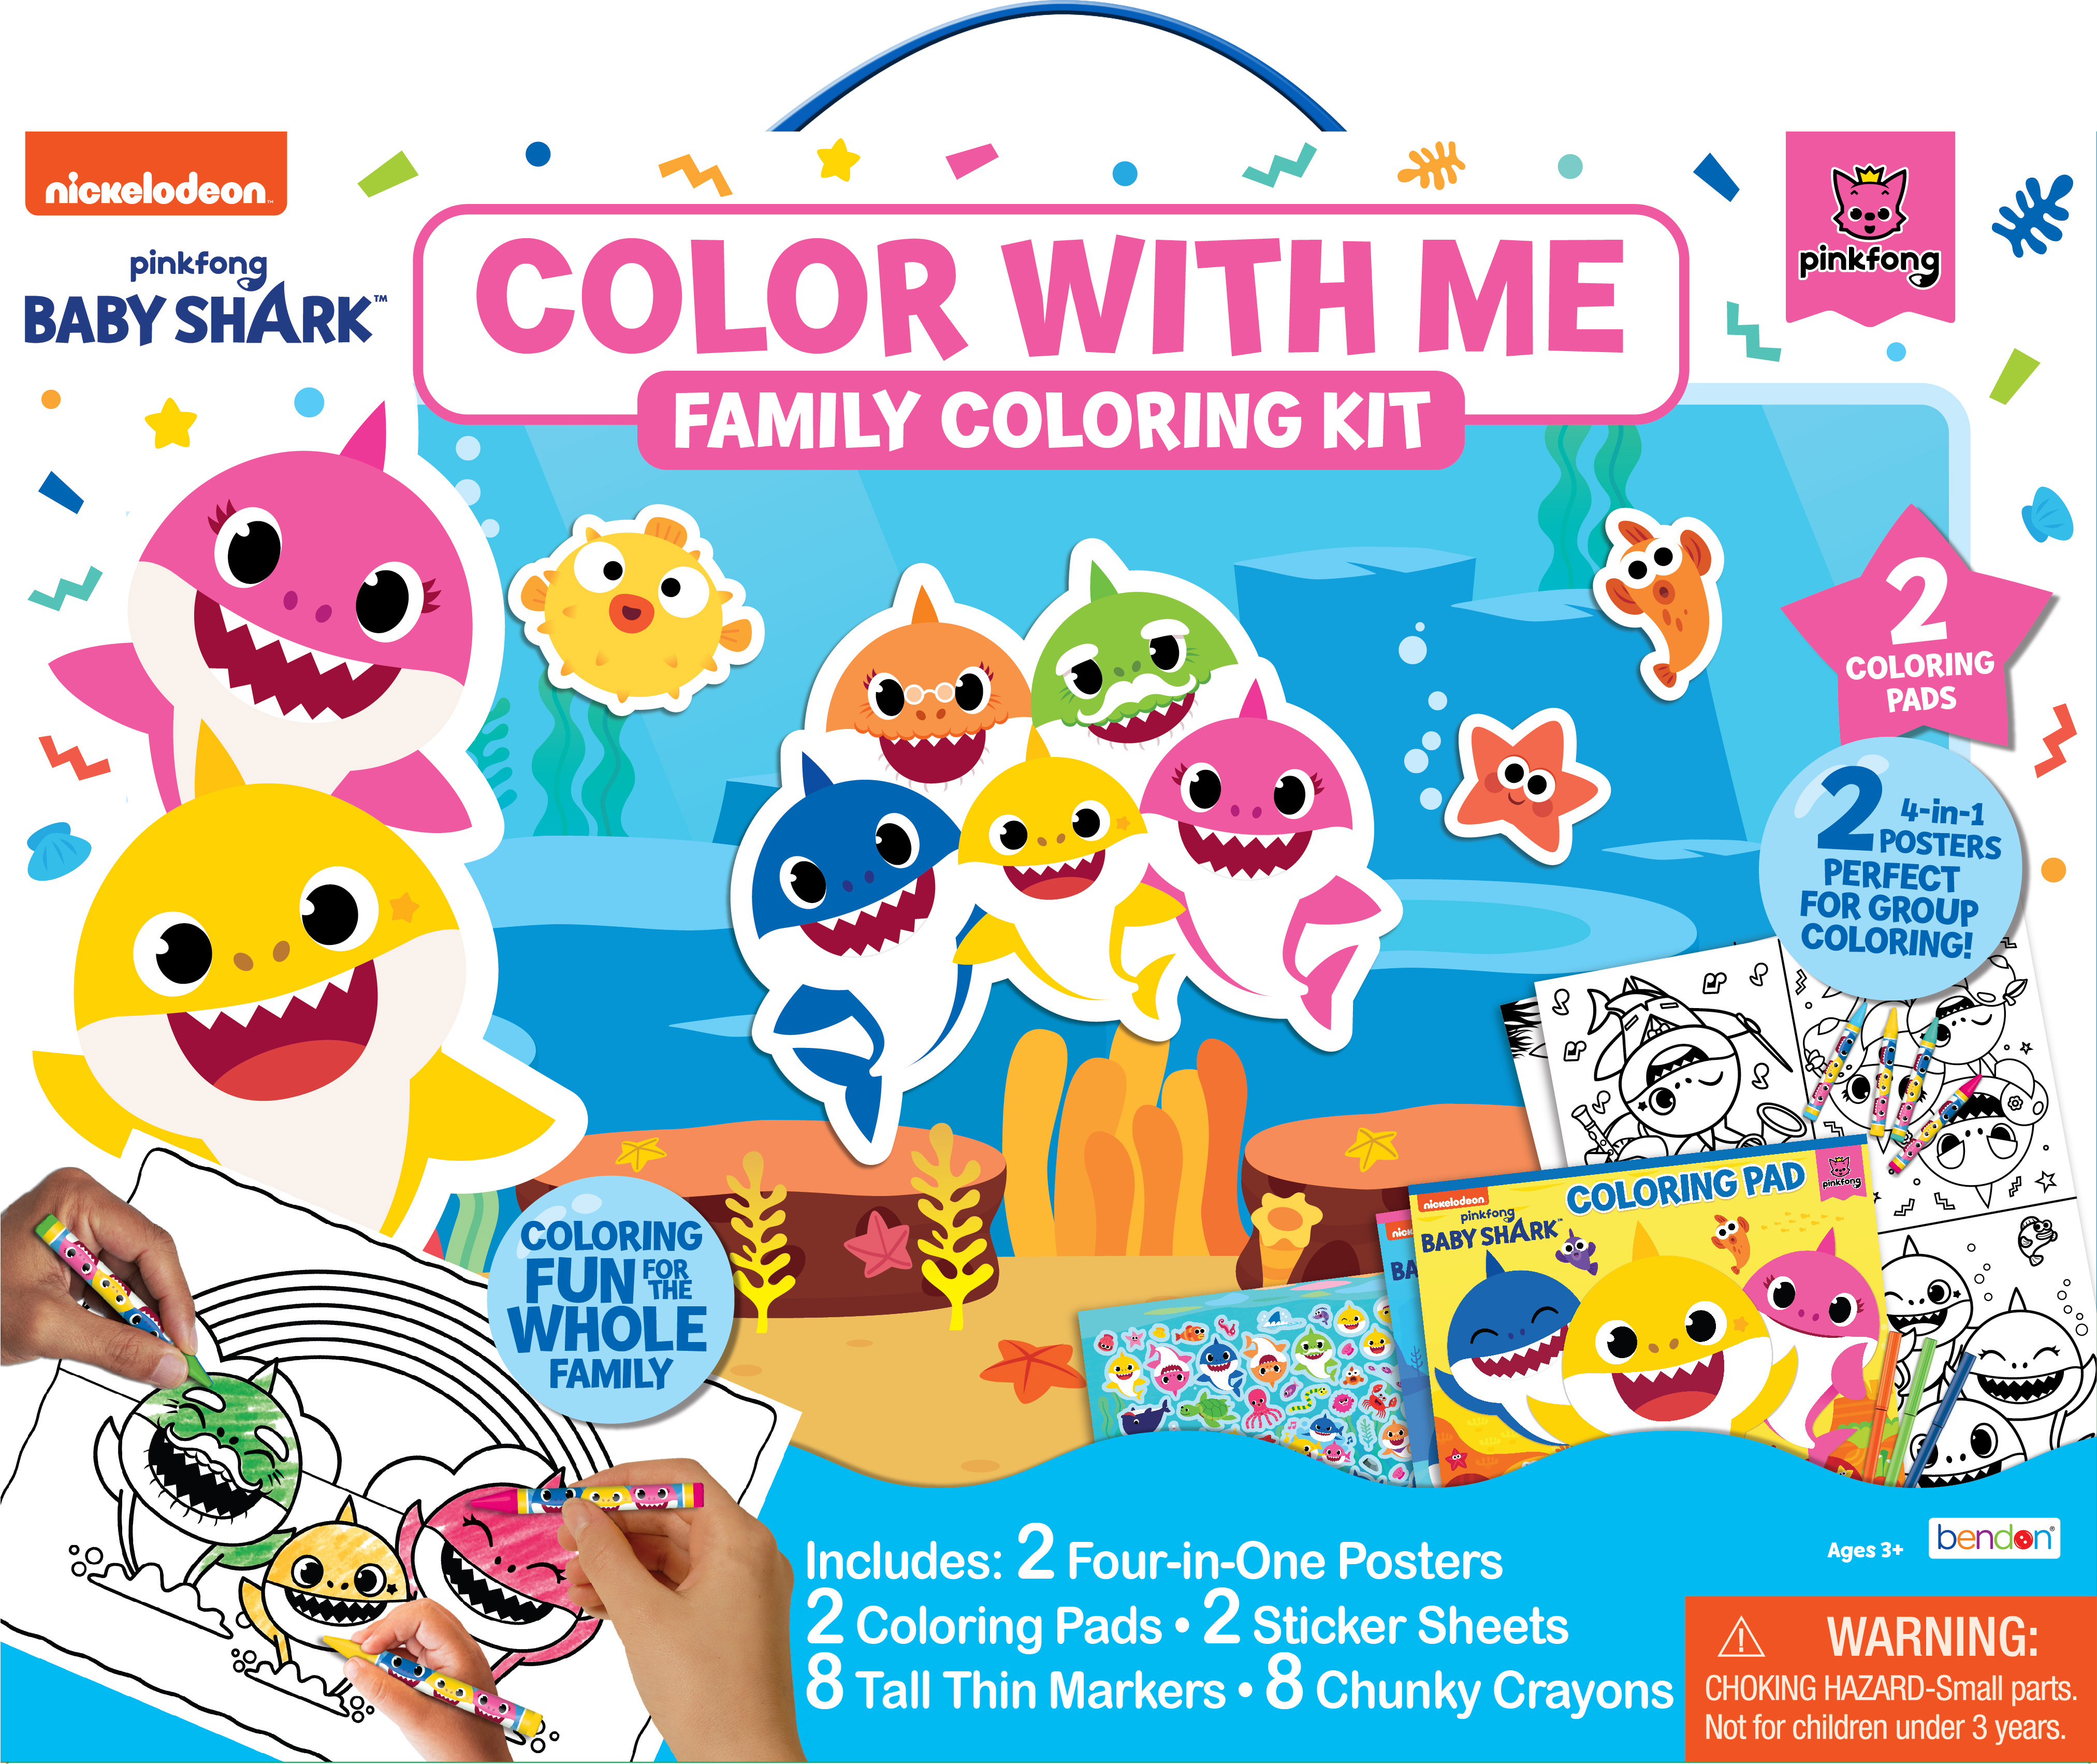 Baby Shark Color With Me Family Coloring Kit with Coloring Books and Supplies - Walmart.com $4.50